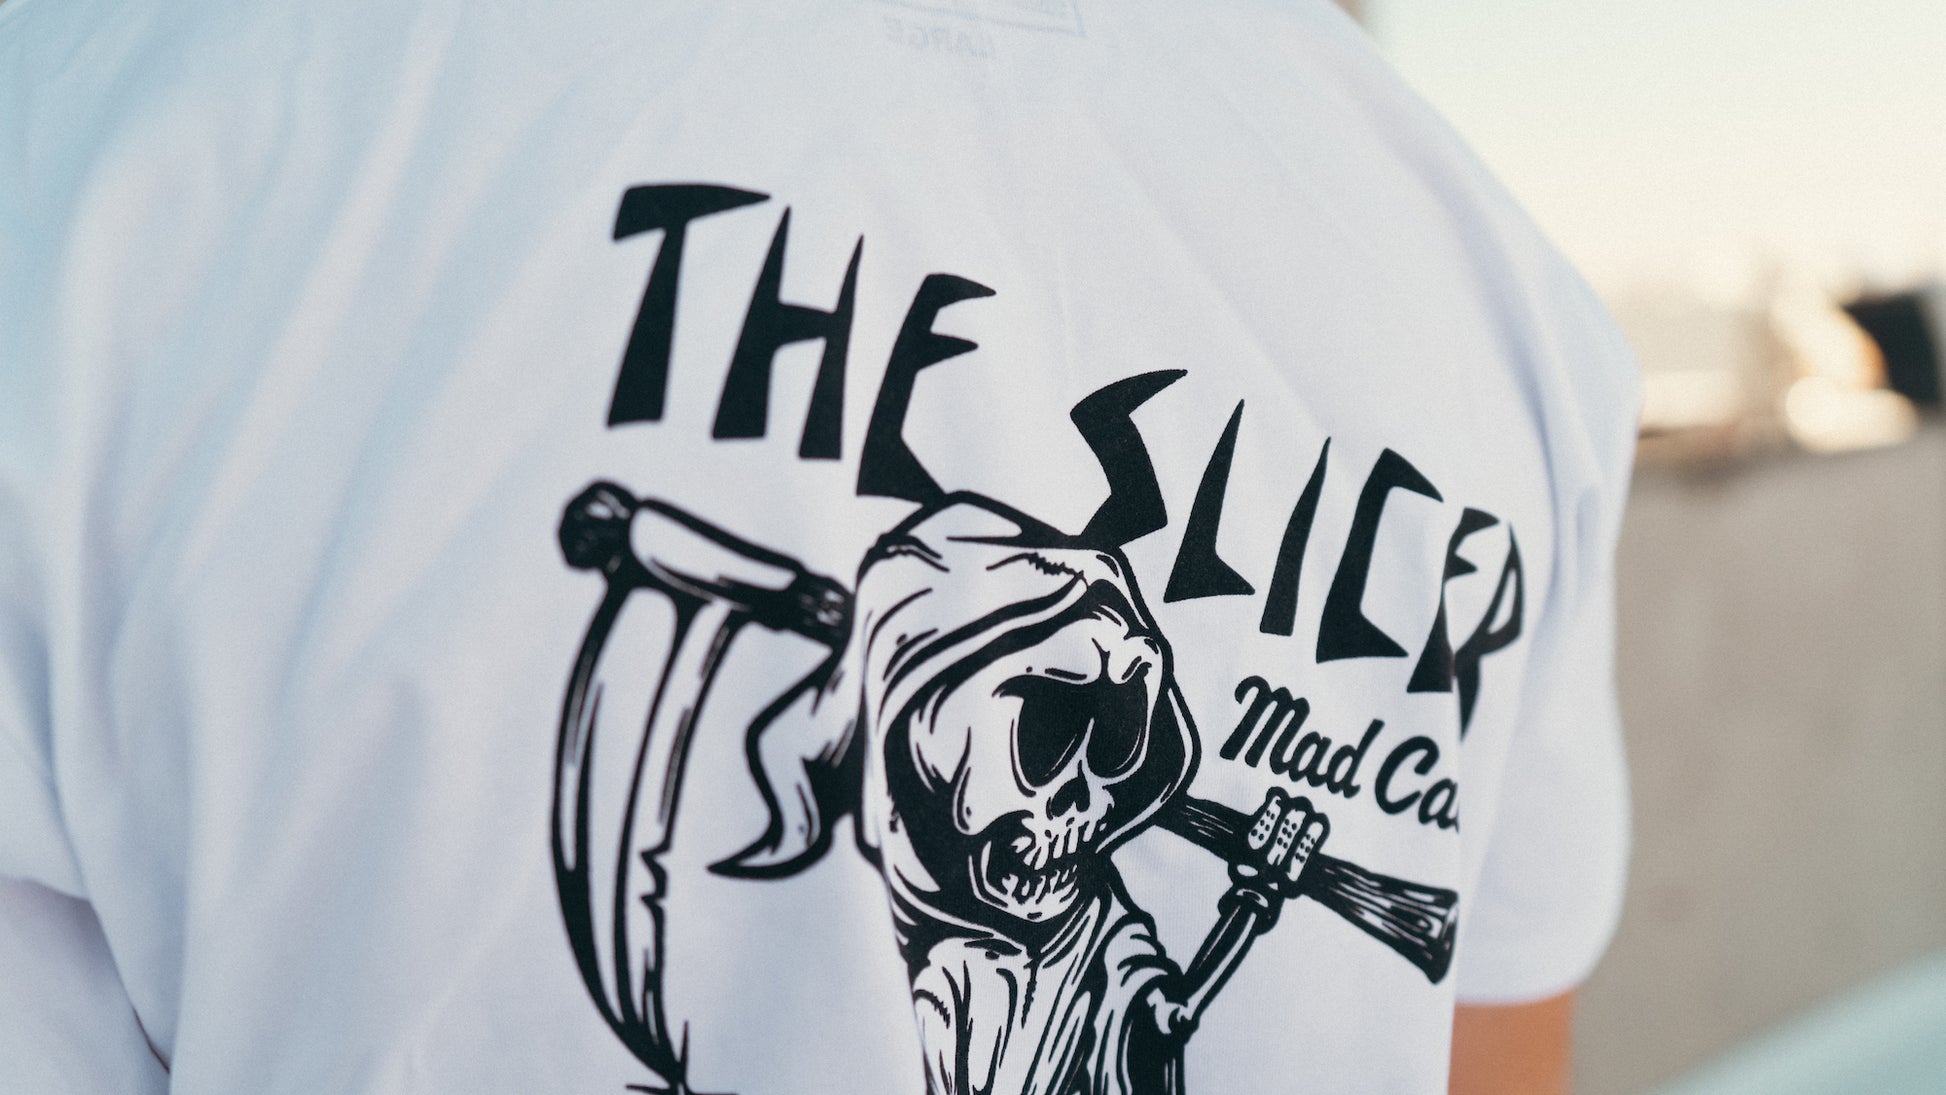 The Slicer Tee - White - Mad Caddy Golf Co.